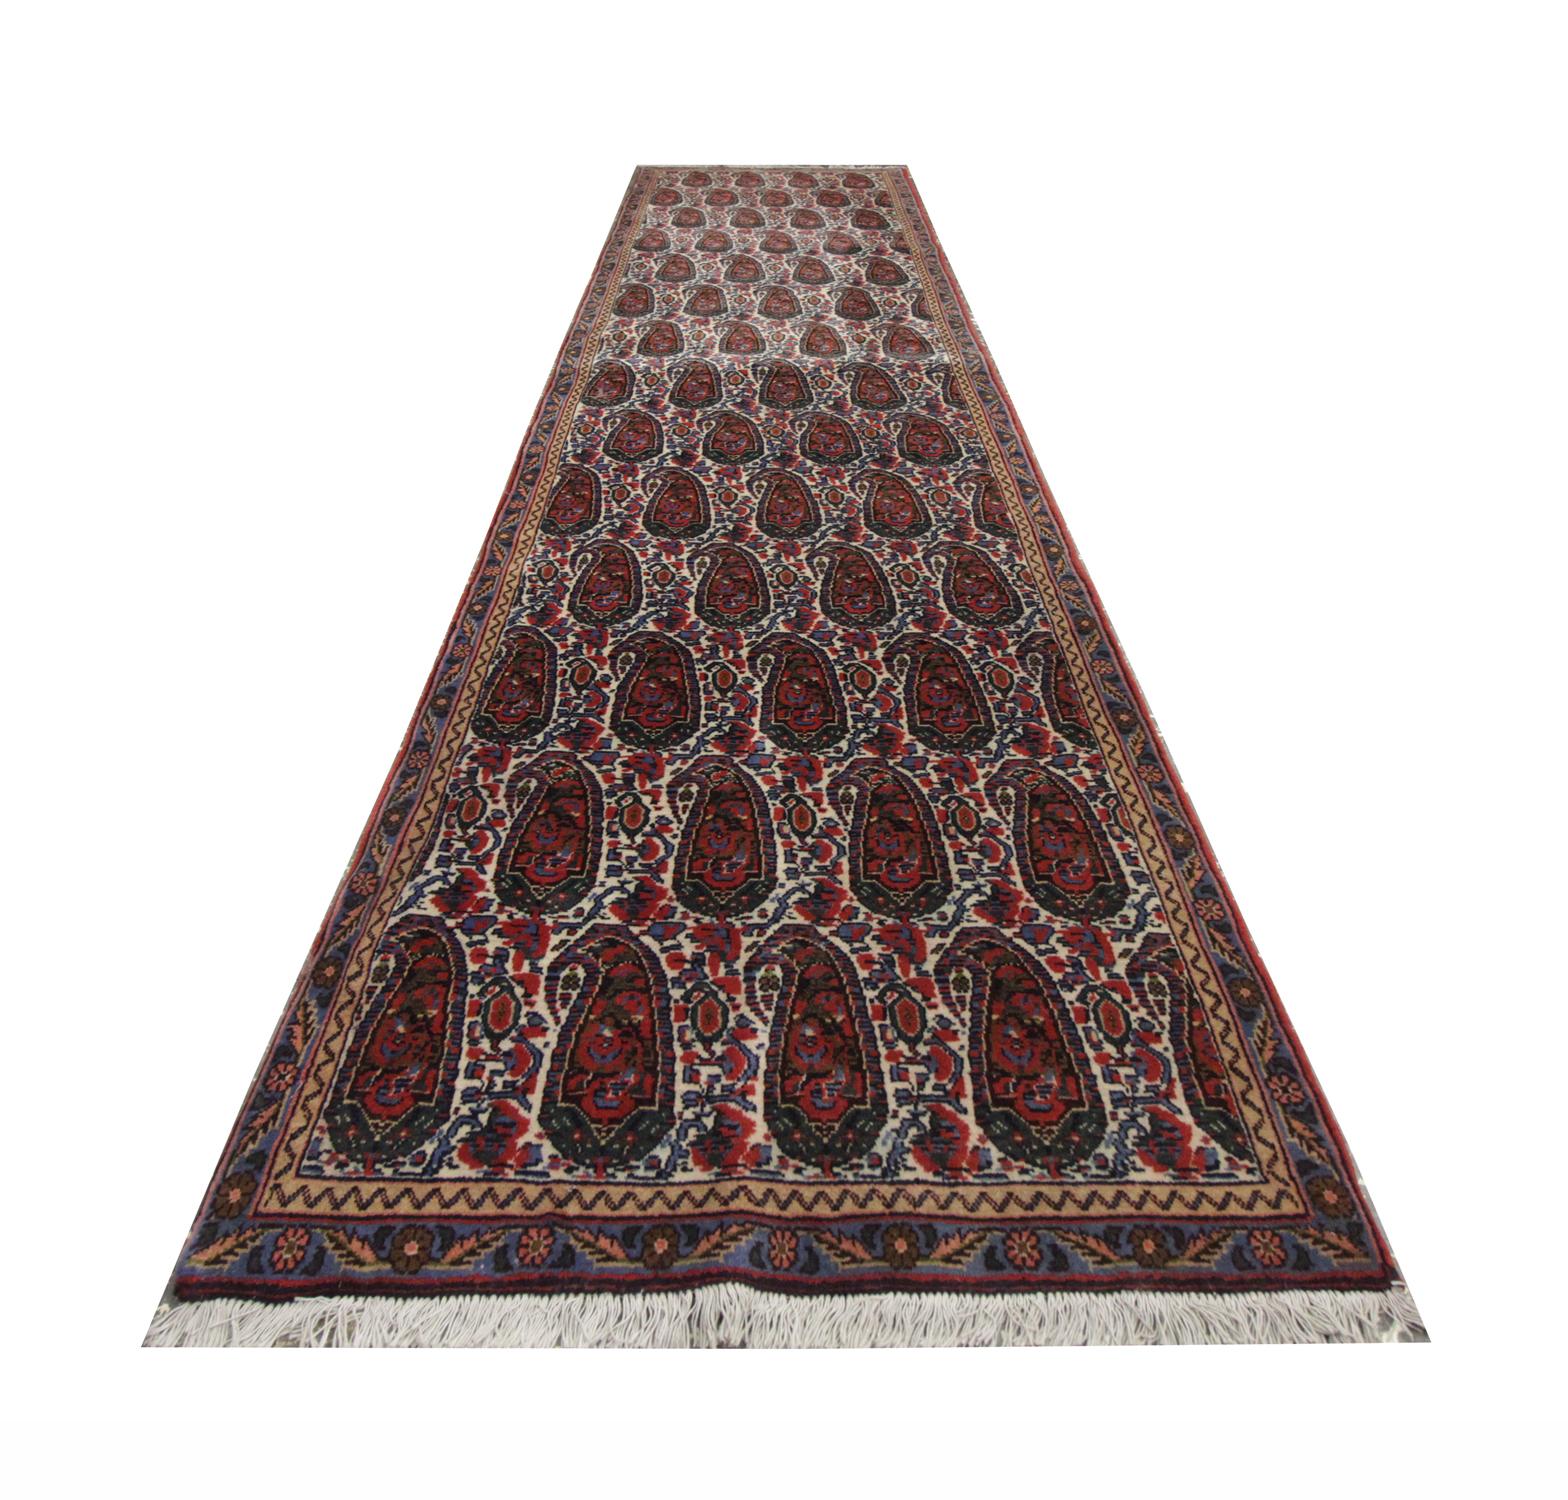 This glorious runner rug has been hand woven with a stunning paisley print. On a light background contrasts against the delicate detailing of the paisley pattern. Purples, reds and deep tones of brown have been used creating a beautiful eye-catching